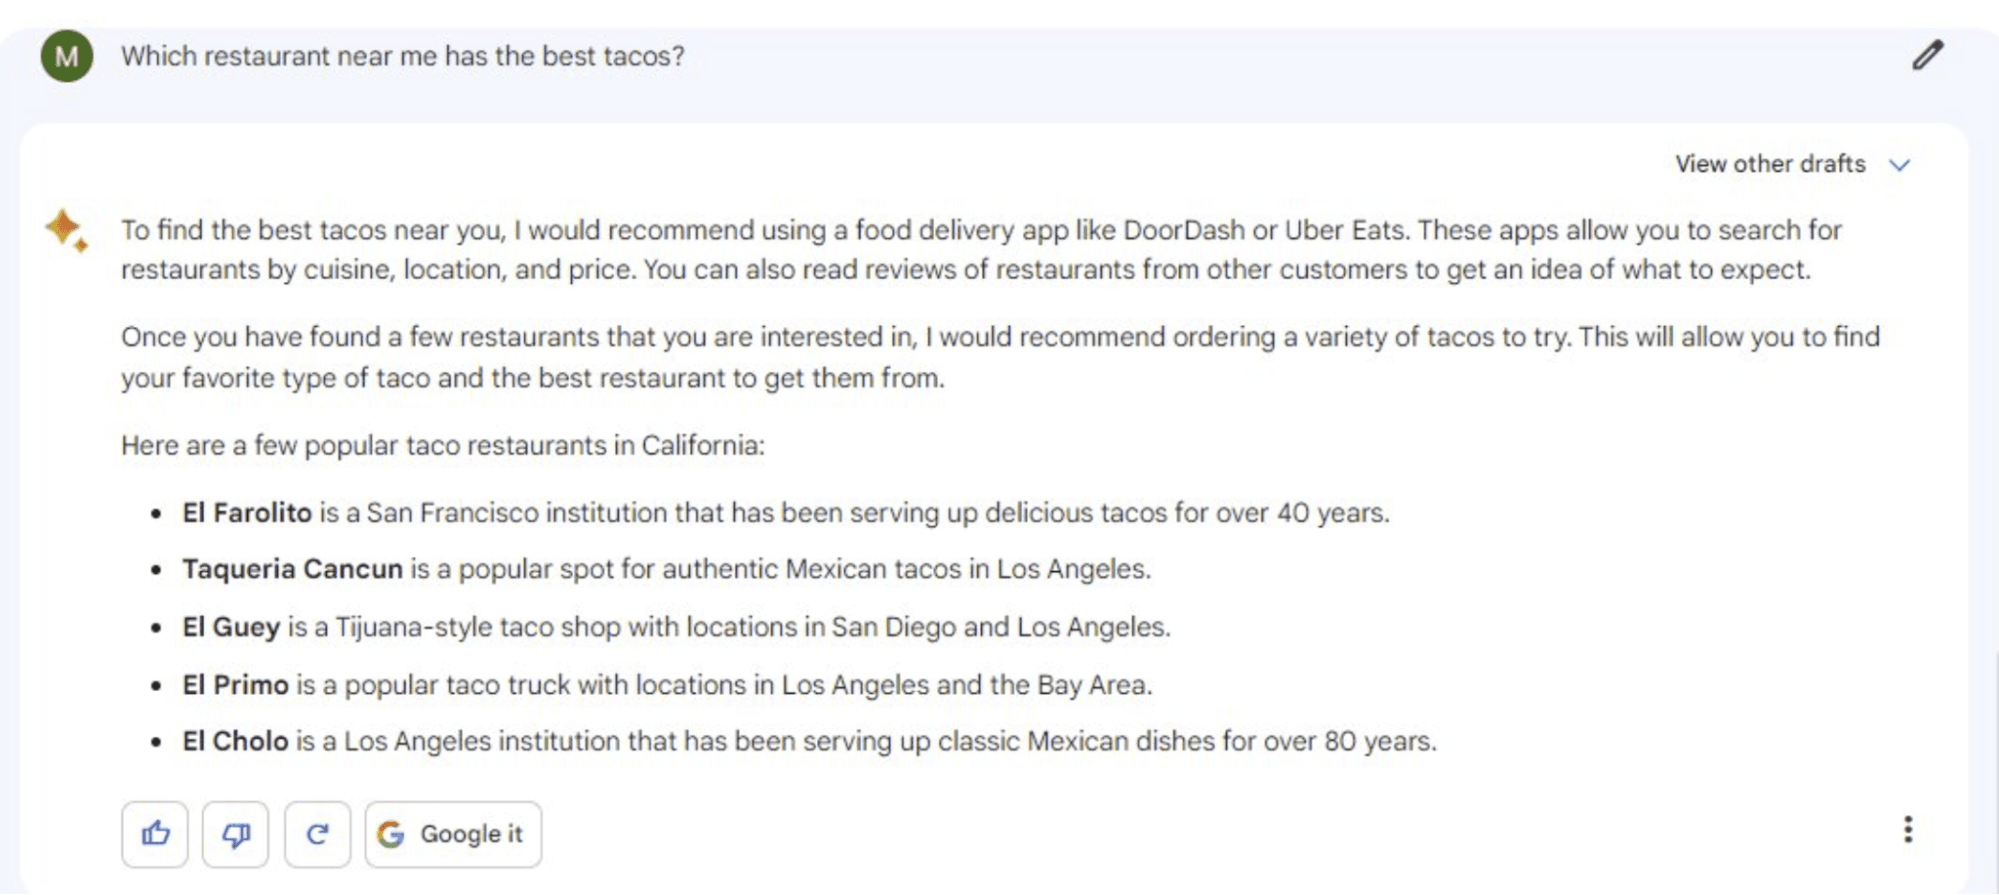 Bard recommends restaurants all over California instead of in my city